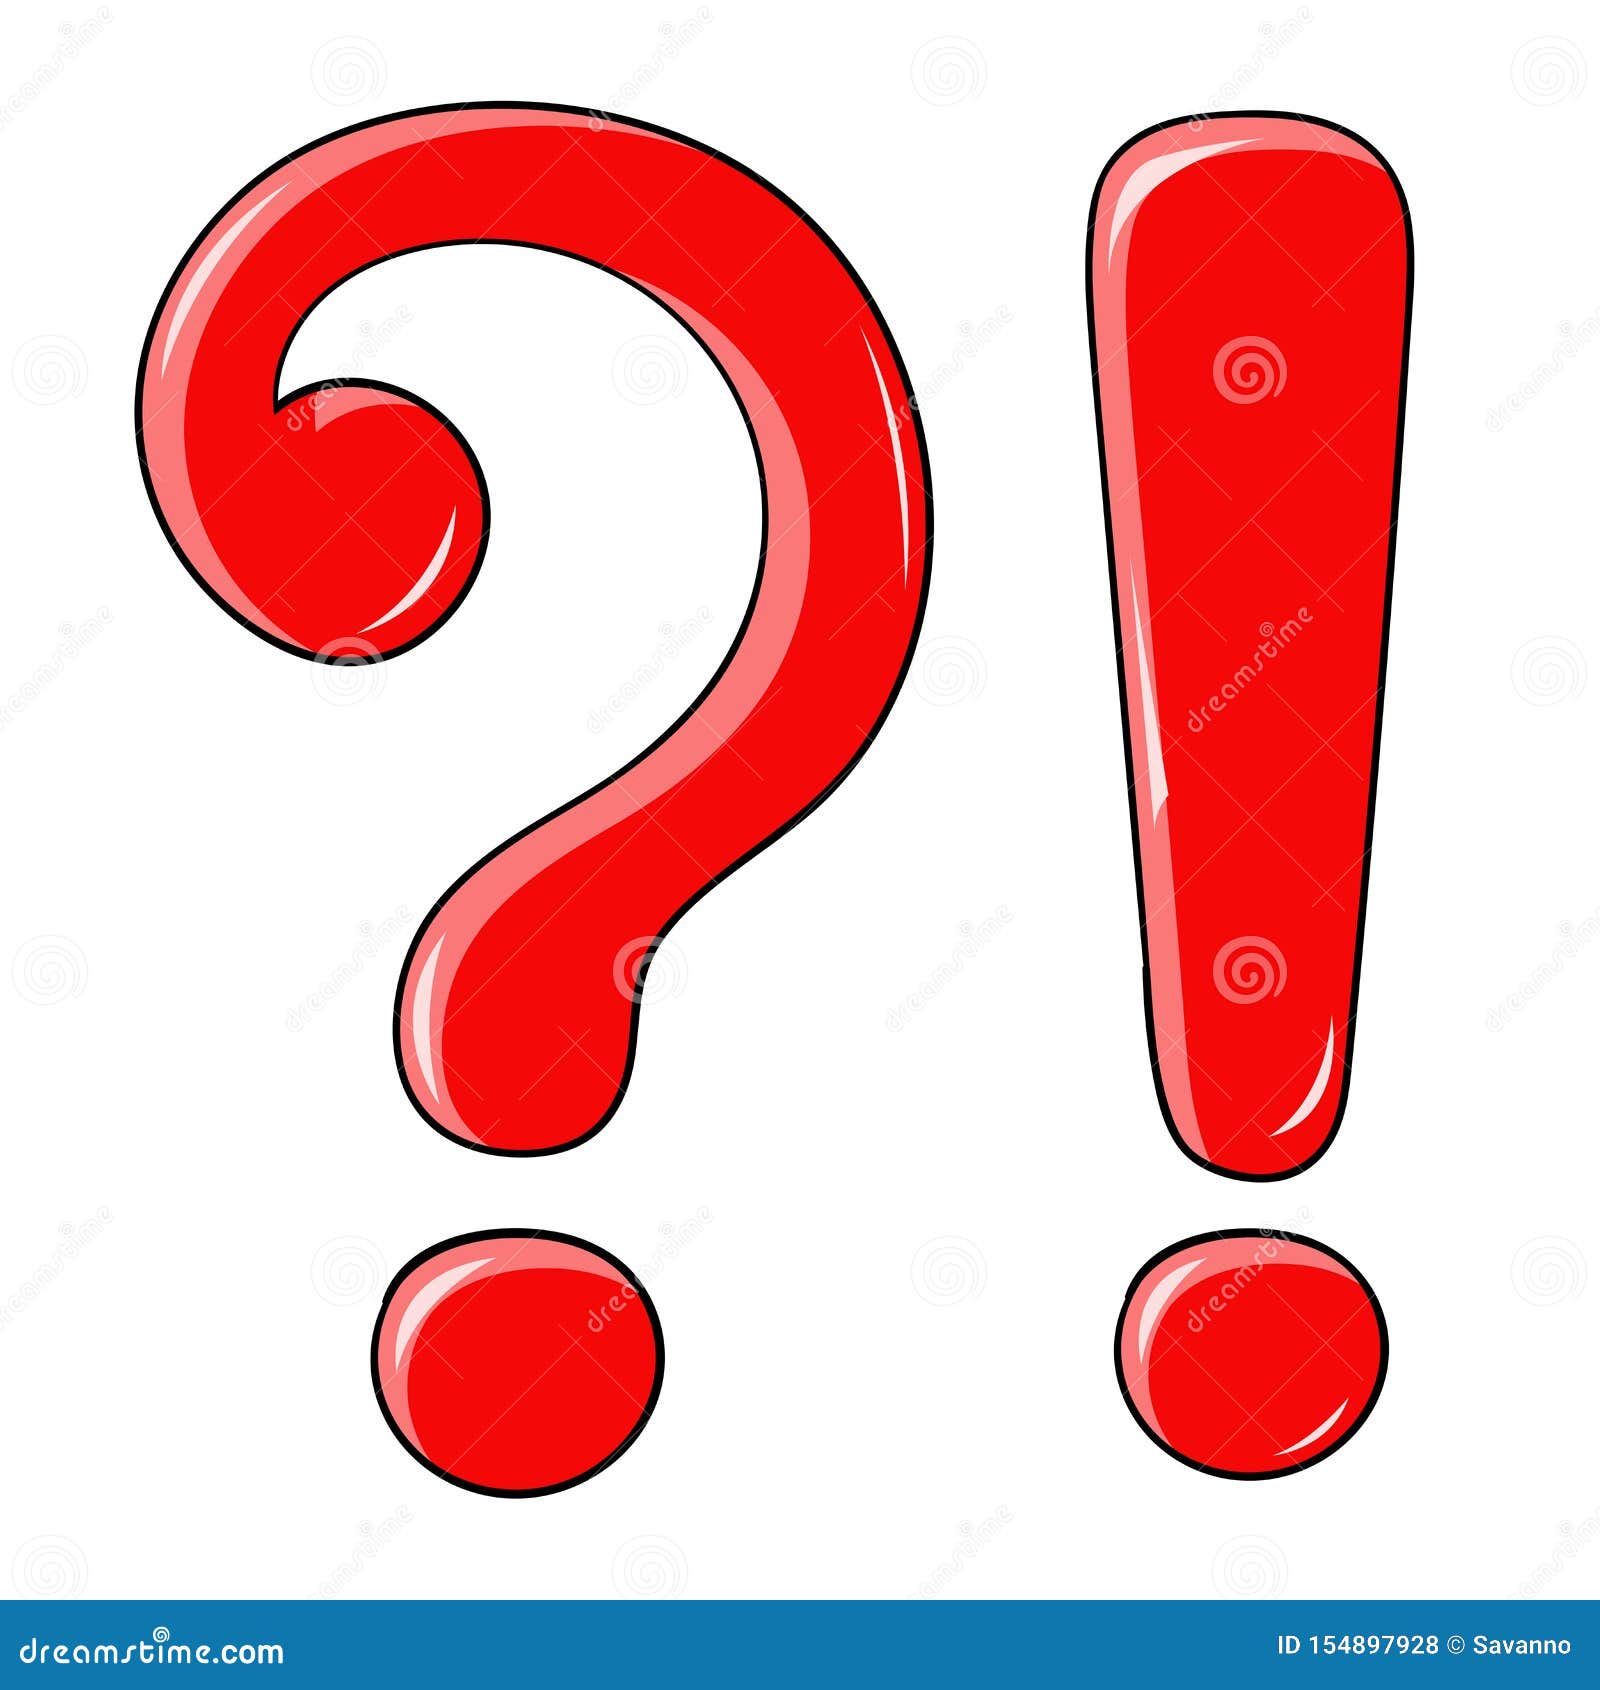 Question and Exlamation Marks. Red Shiny Elements Stock Vector ...